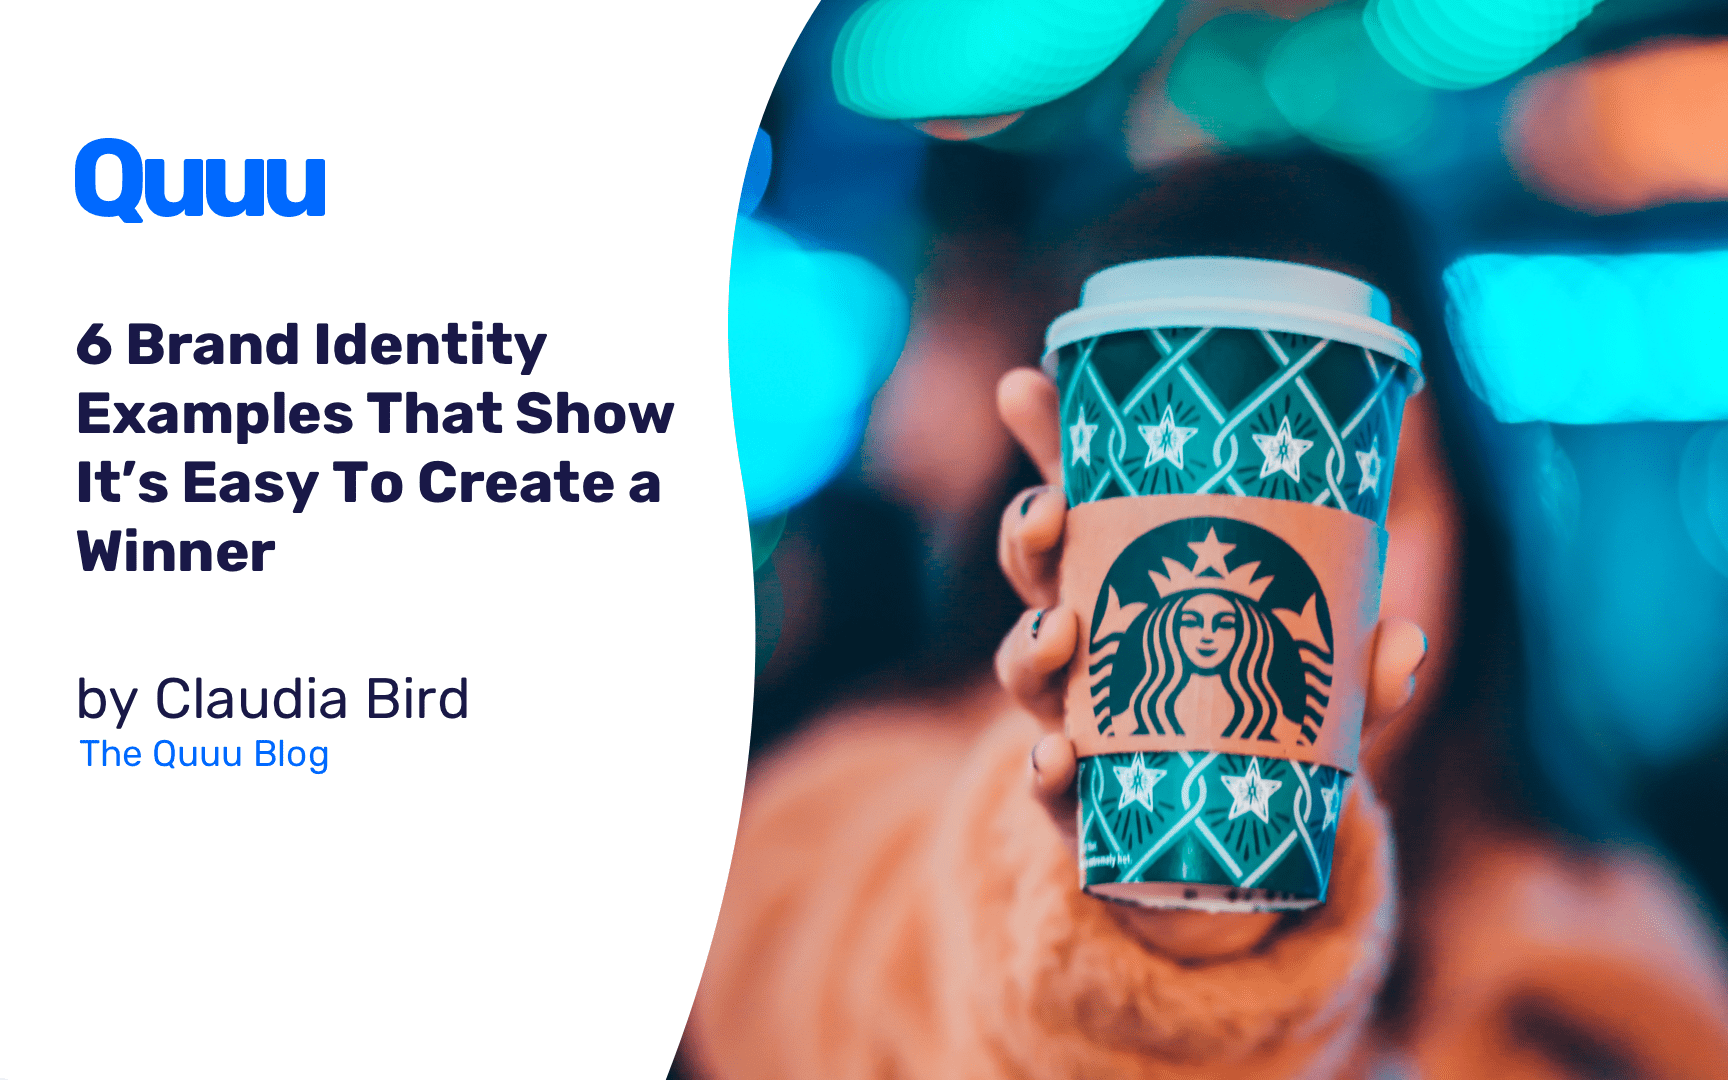 6 Brand Identity Examples That Show It’s Easy To Create a Winner